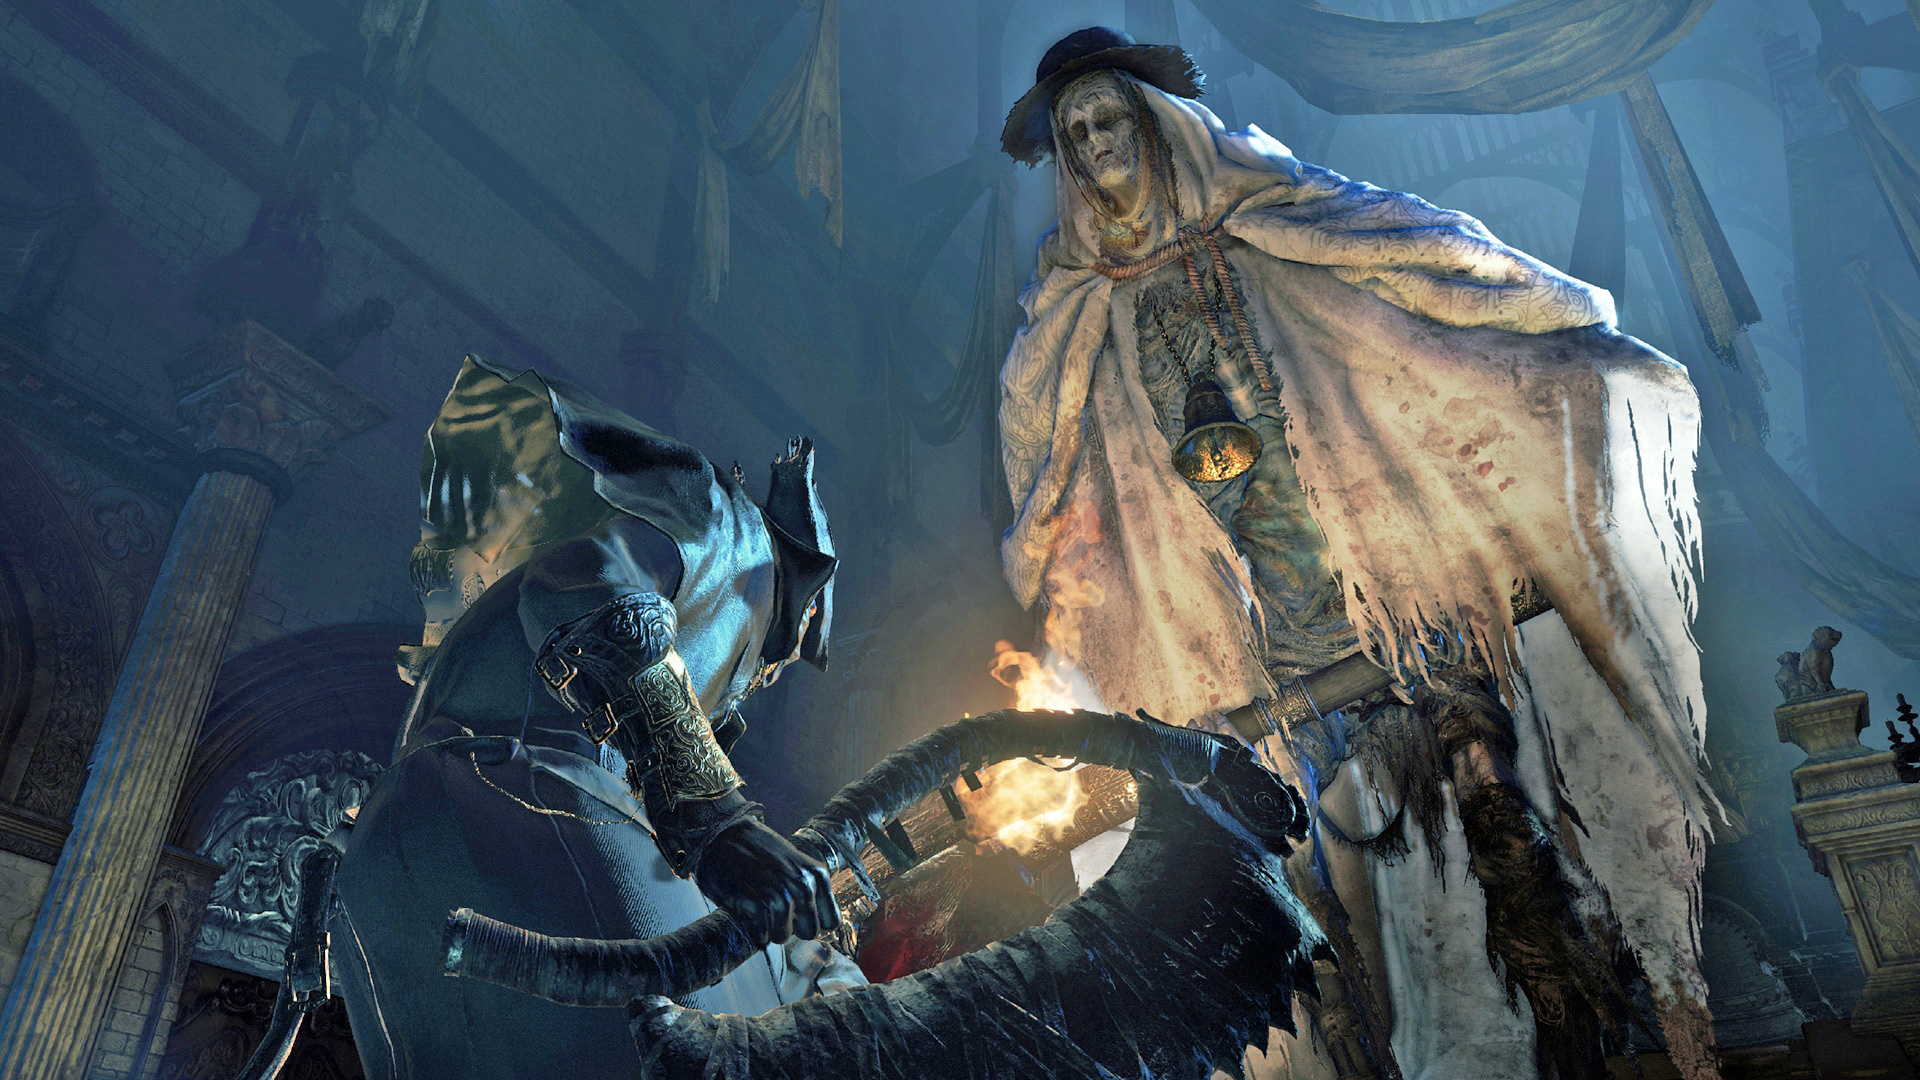 Bloodborne was the most-played PlayStation Now game on PC this spring